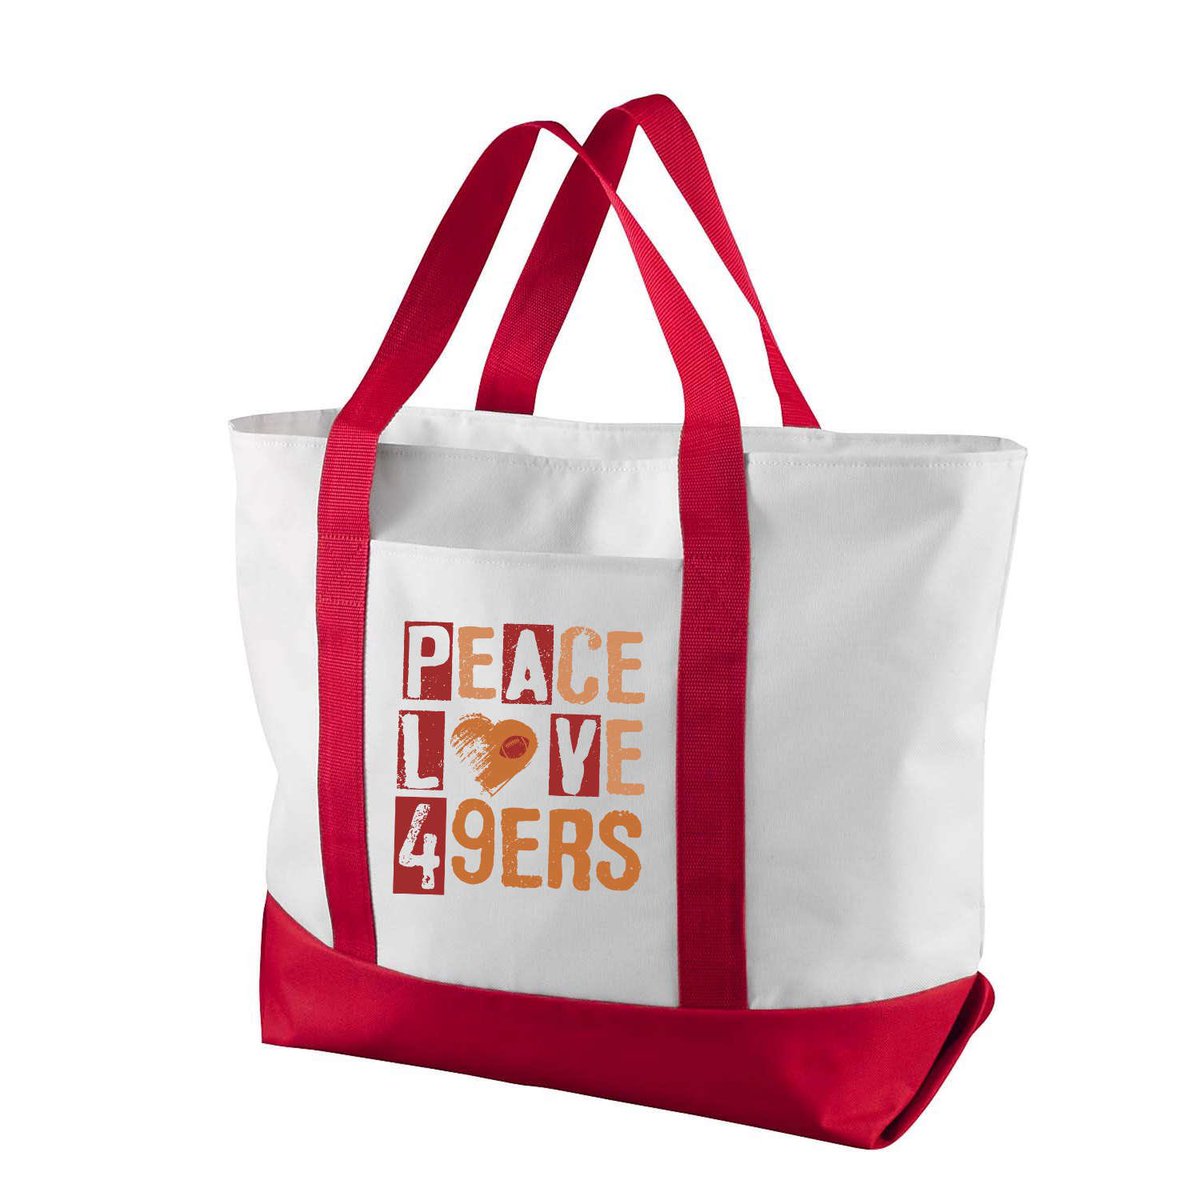 Peace. Love. 49ers. The vibes are good with this tote bag. 
stayfaithful.vip/product/peace-…
.
#49ers #49ersfaithful #totebag #goniners